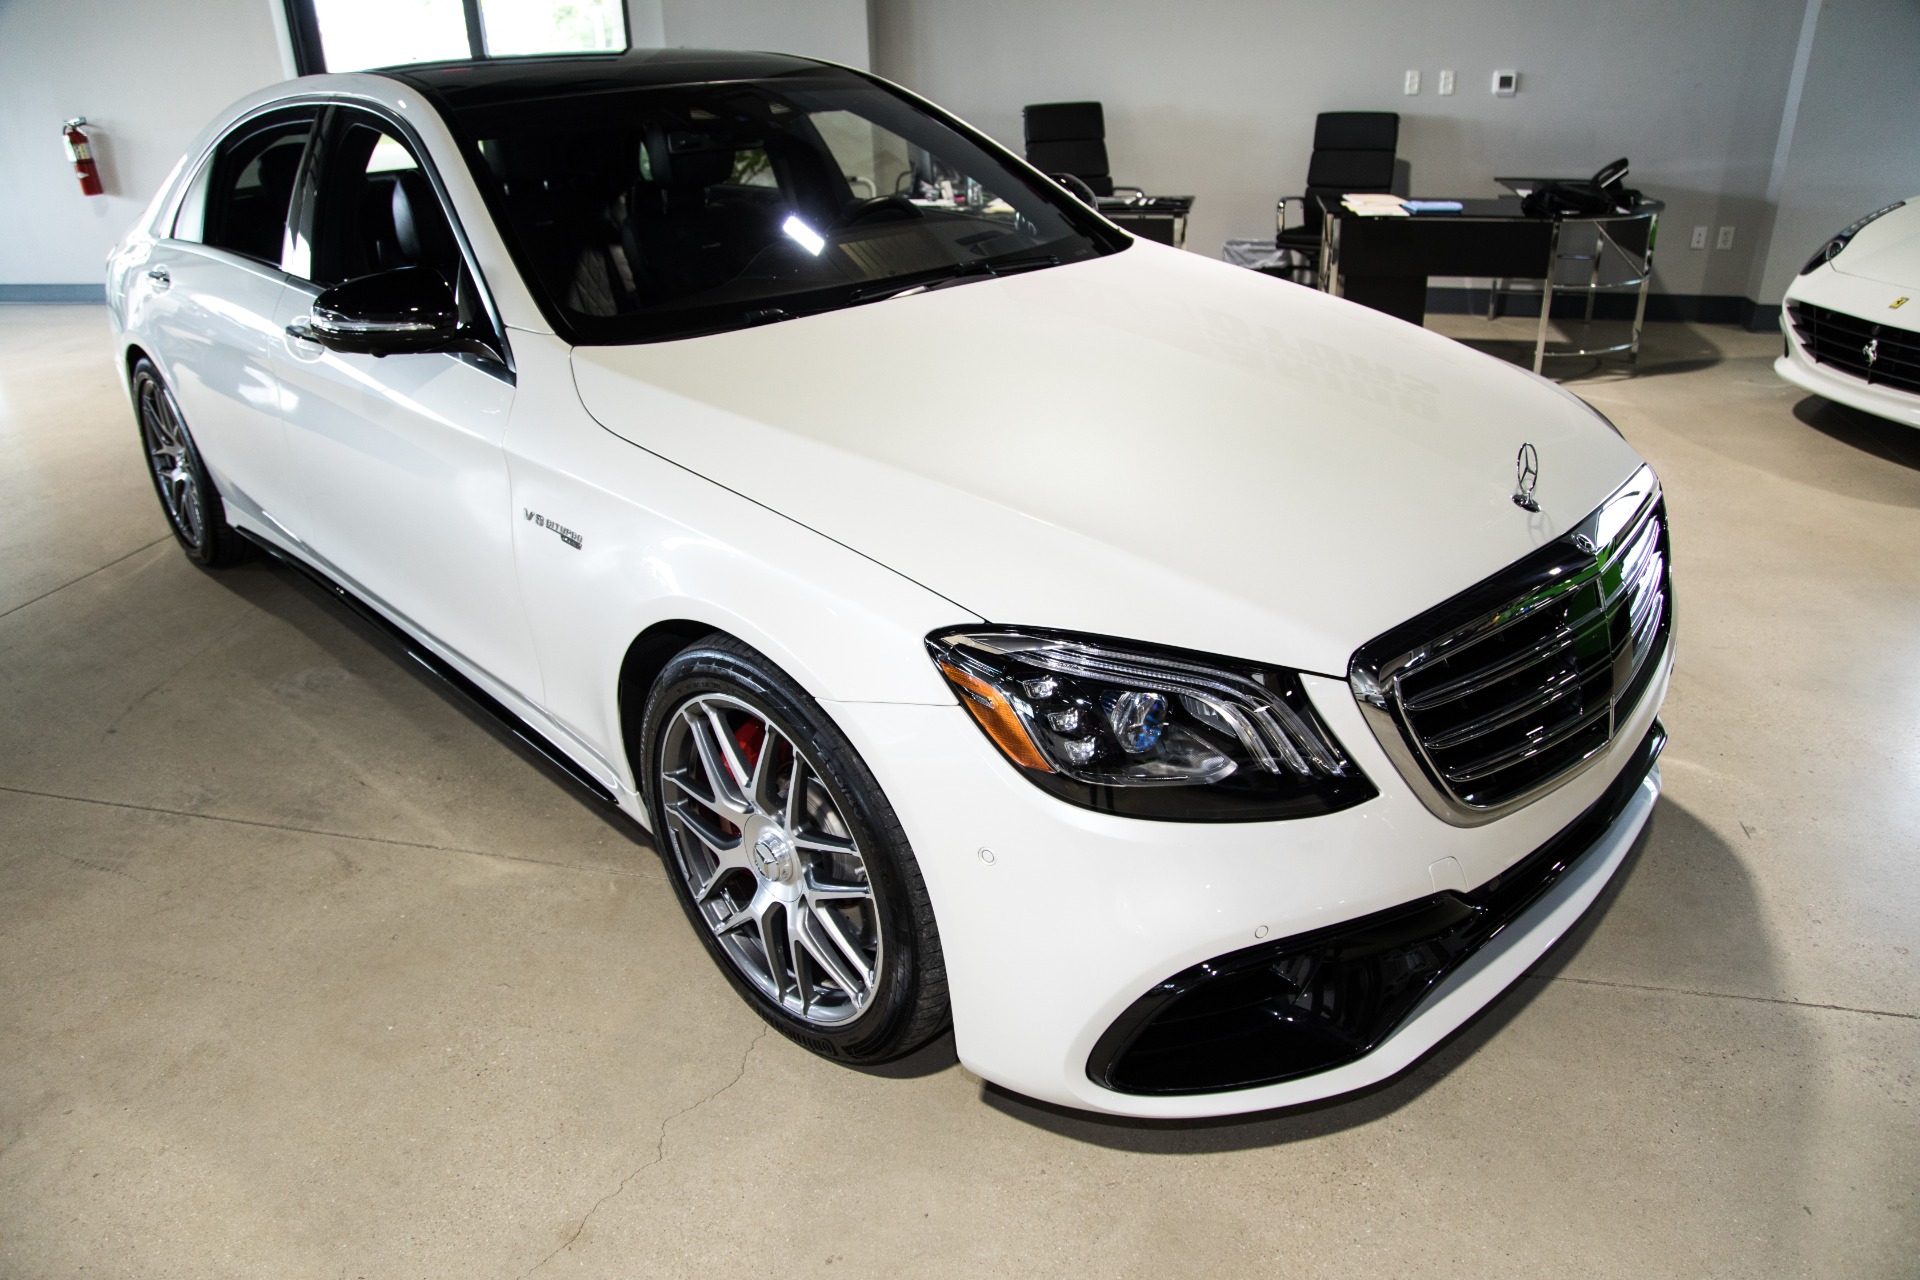 Used 2018 Mercedes Benz S Class Amg S 63 For Sale 129 900 Marino